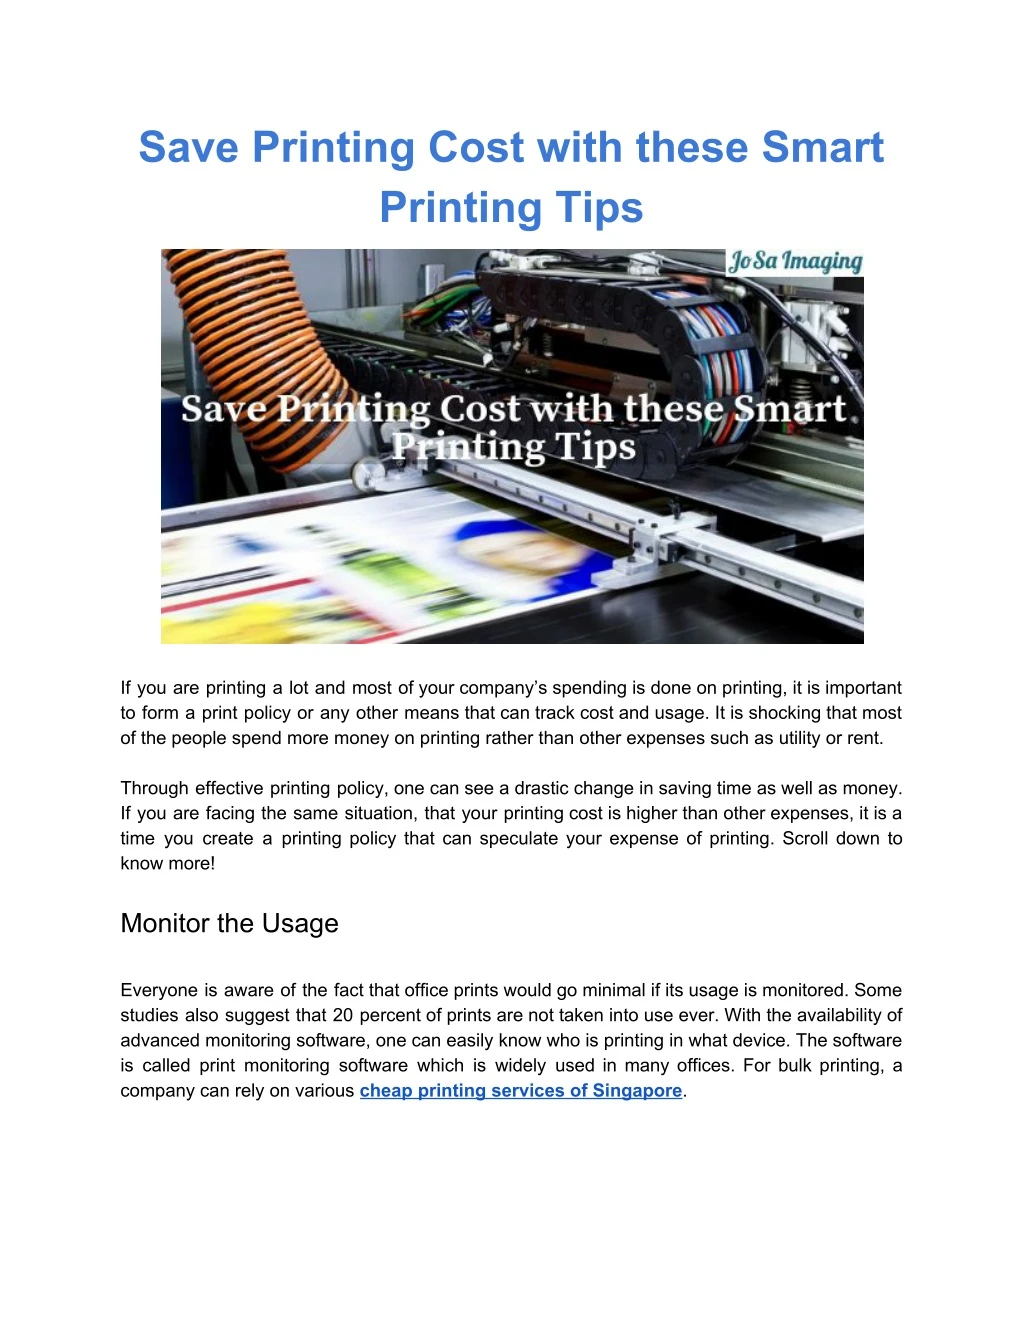 save printing cost with these smart printing tips